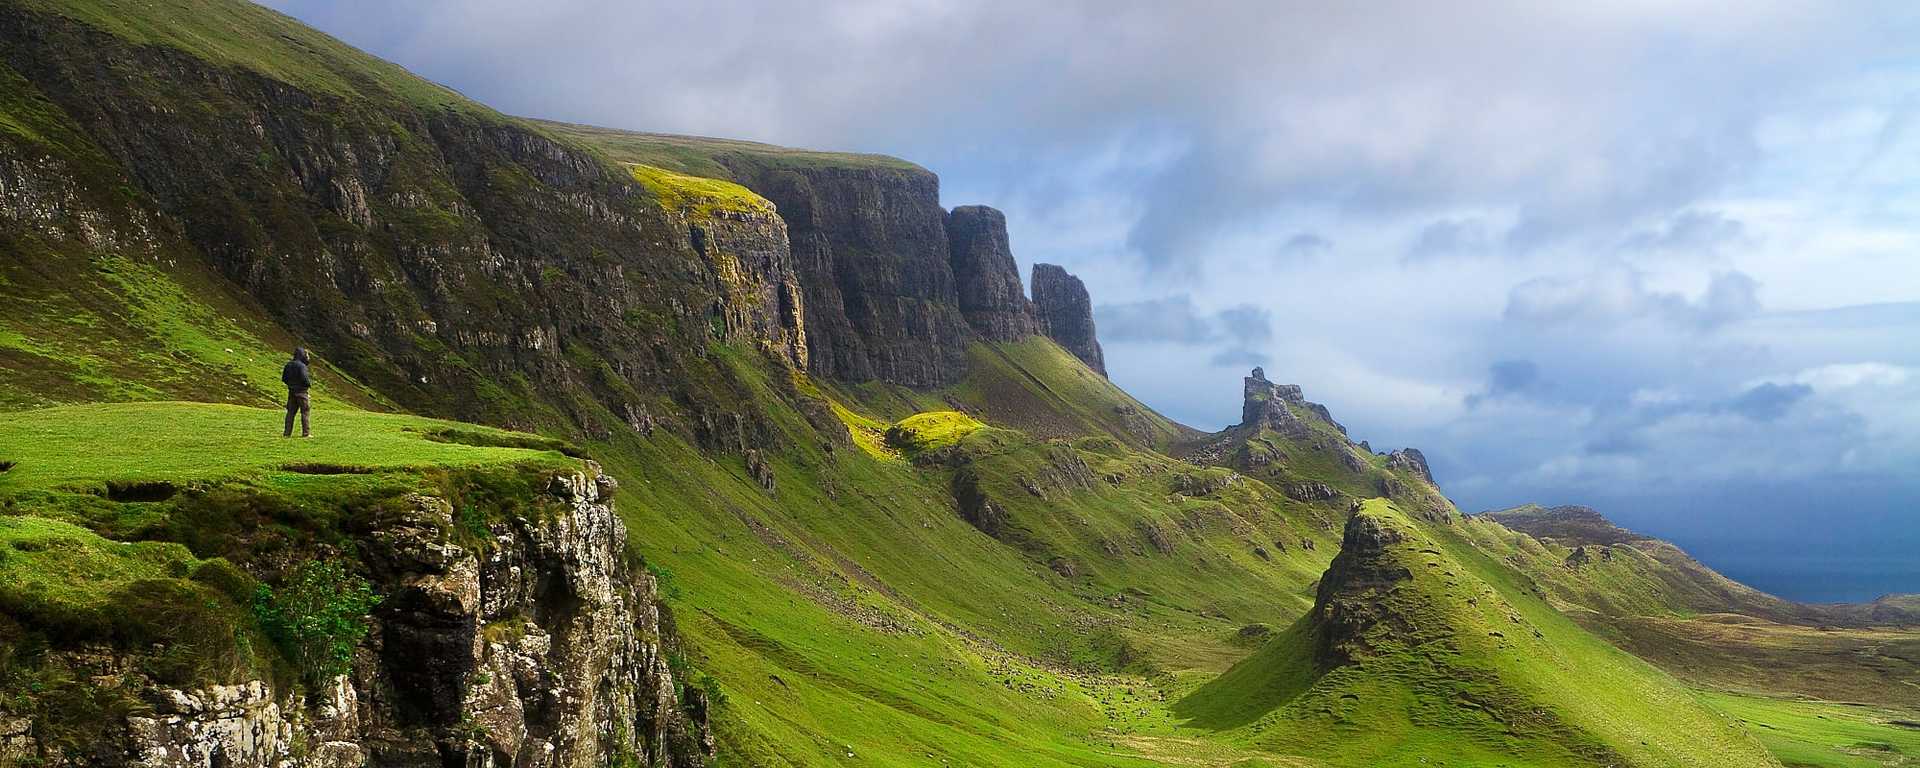 Hiker with spectacular view at the Quiraing on the Isle of Skye in Scotland